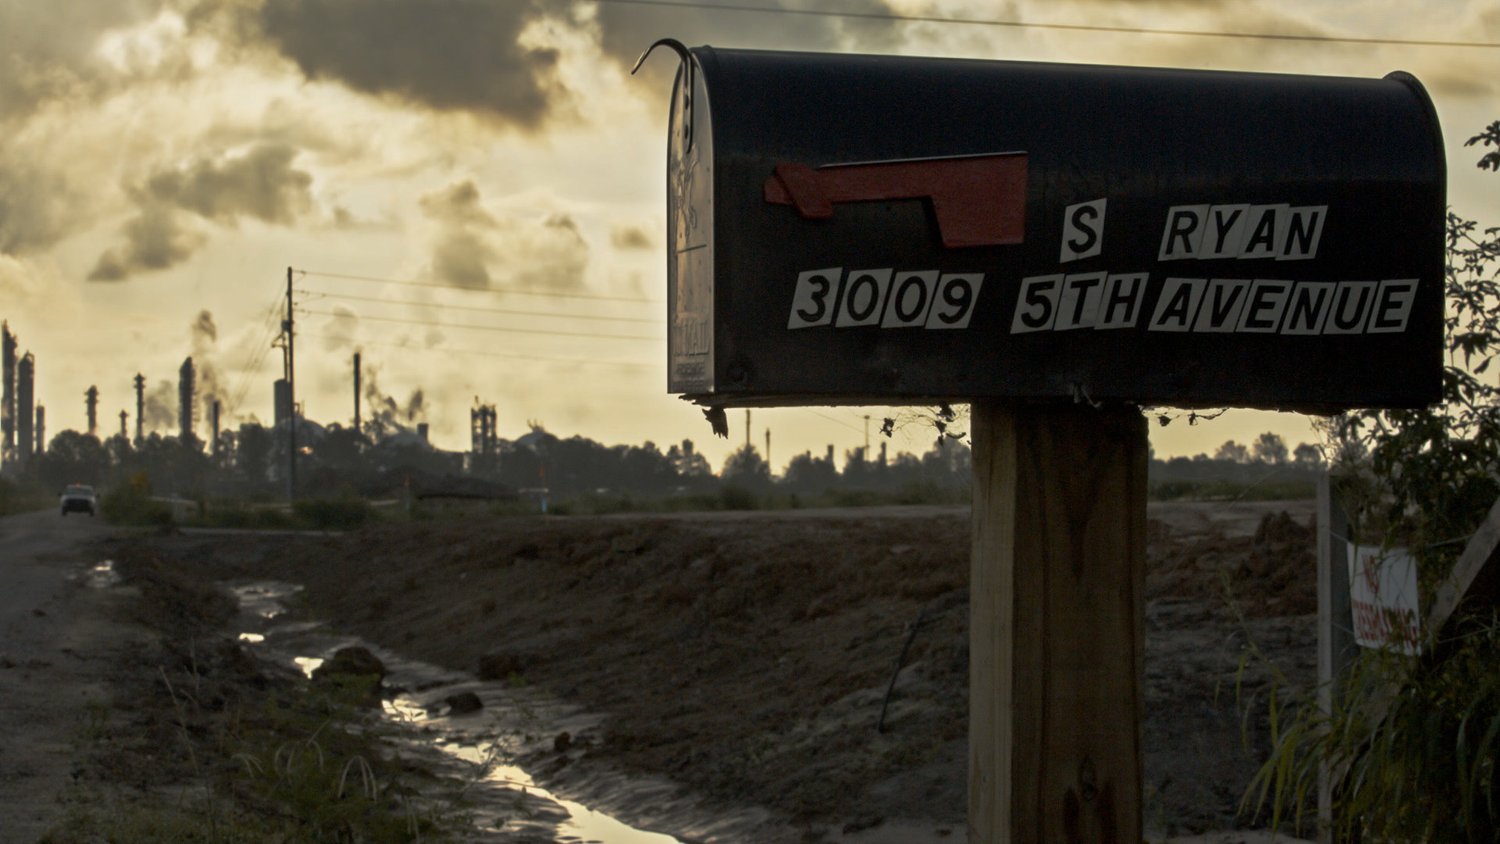 An image from the film 'Mossville- When Great Trees Fall' featuring a mailbox in an industrial landscape